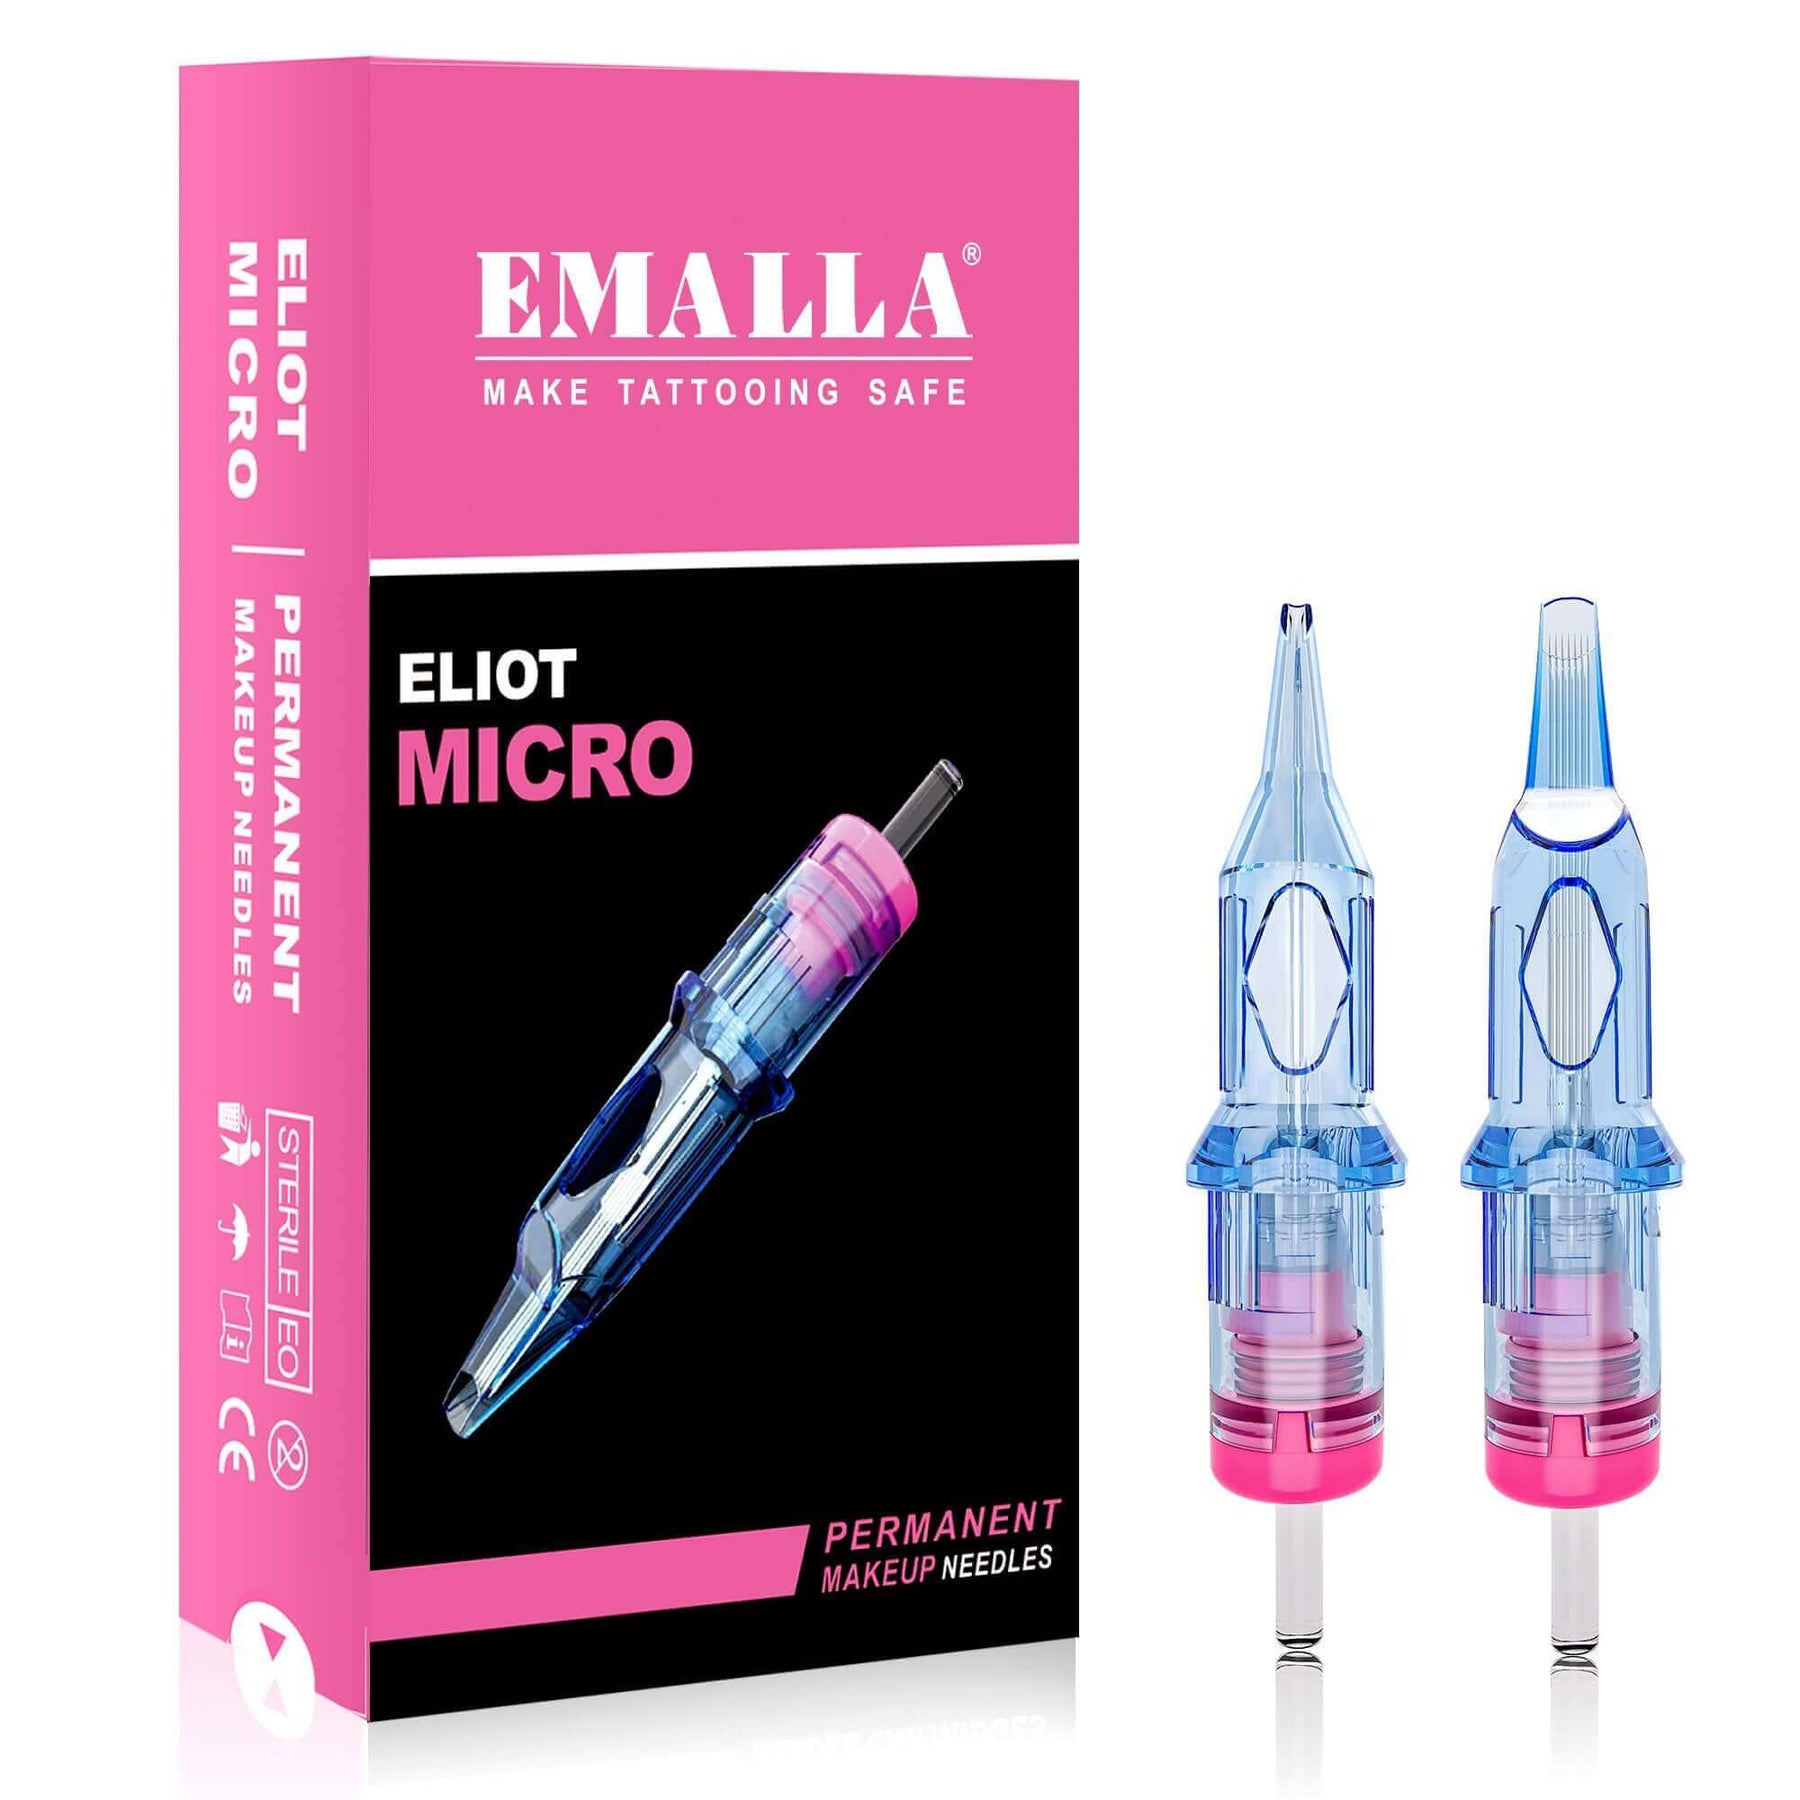 EMALLA ELIOT MICRO PMU Cartridge Needles Curved Magnum from front view